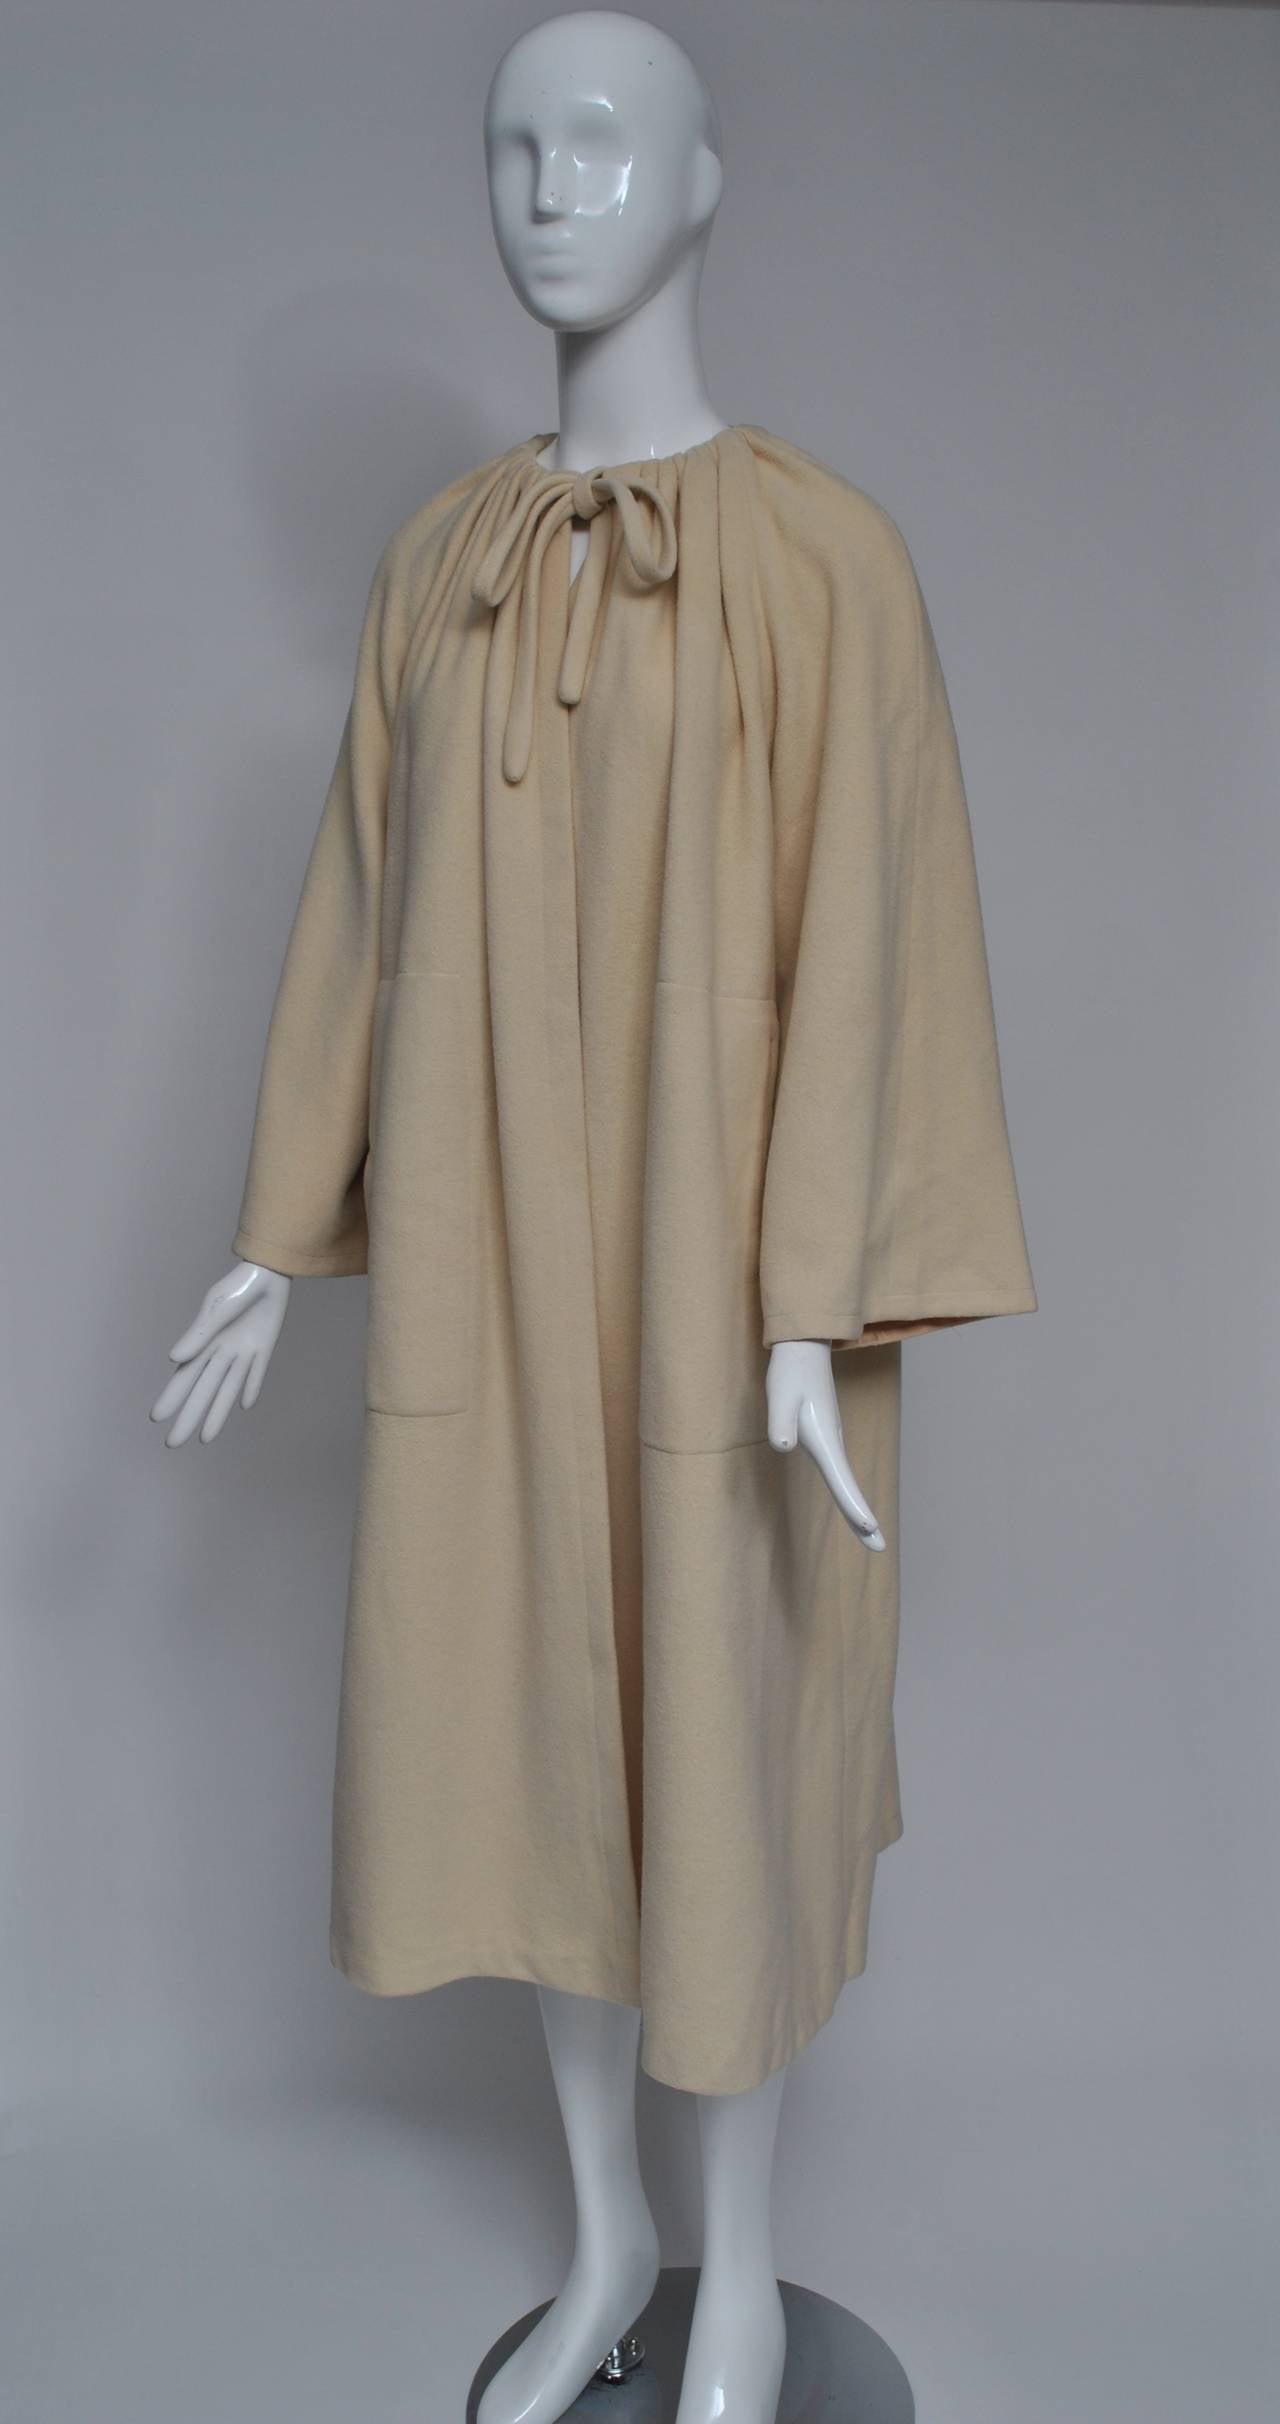 A classic, timeless design from the 1970s, this ivory beige cashmere coat features a drawstring neckline with tie, raglan sleeves, and bound, slash pockets. By Bill Haire for Fredericks Sport, the unlined coat boasts chic simplicity and versatility.